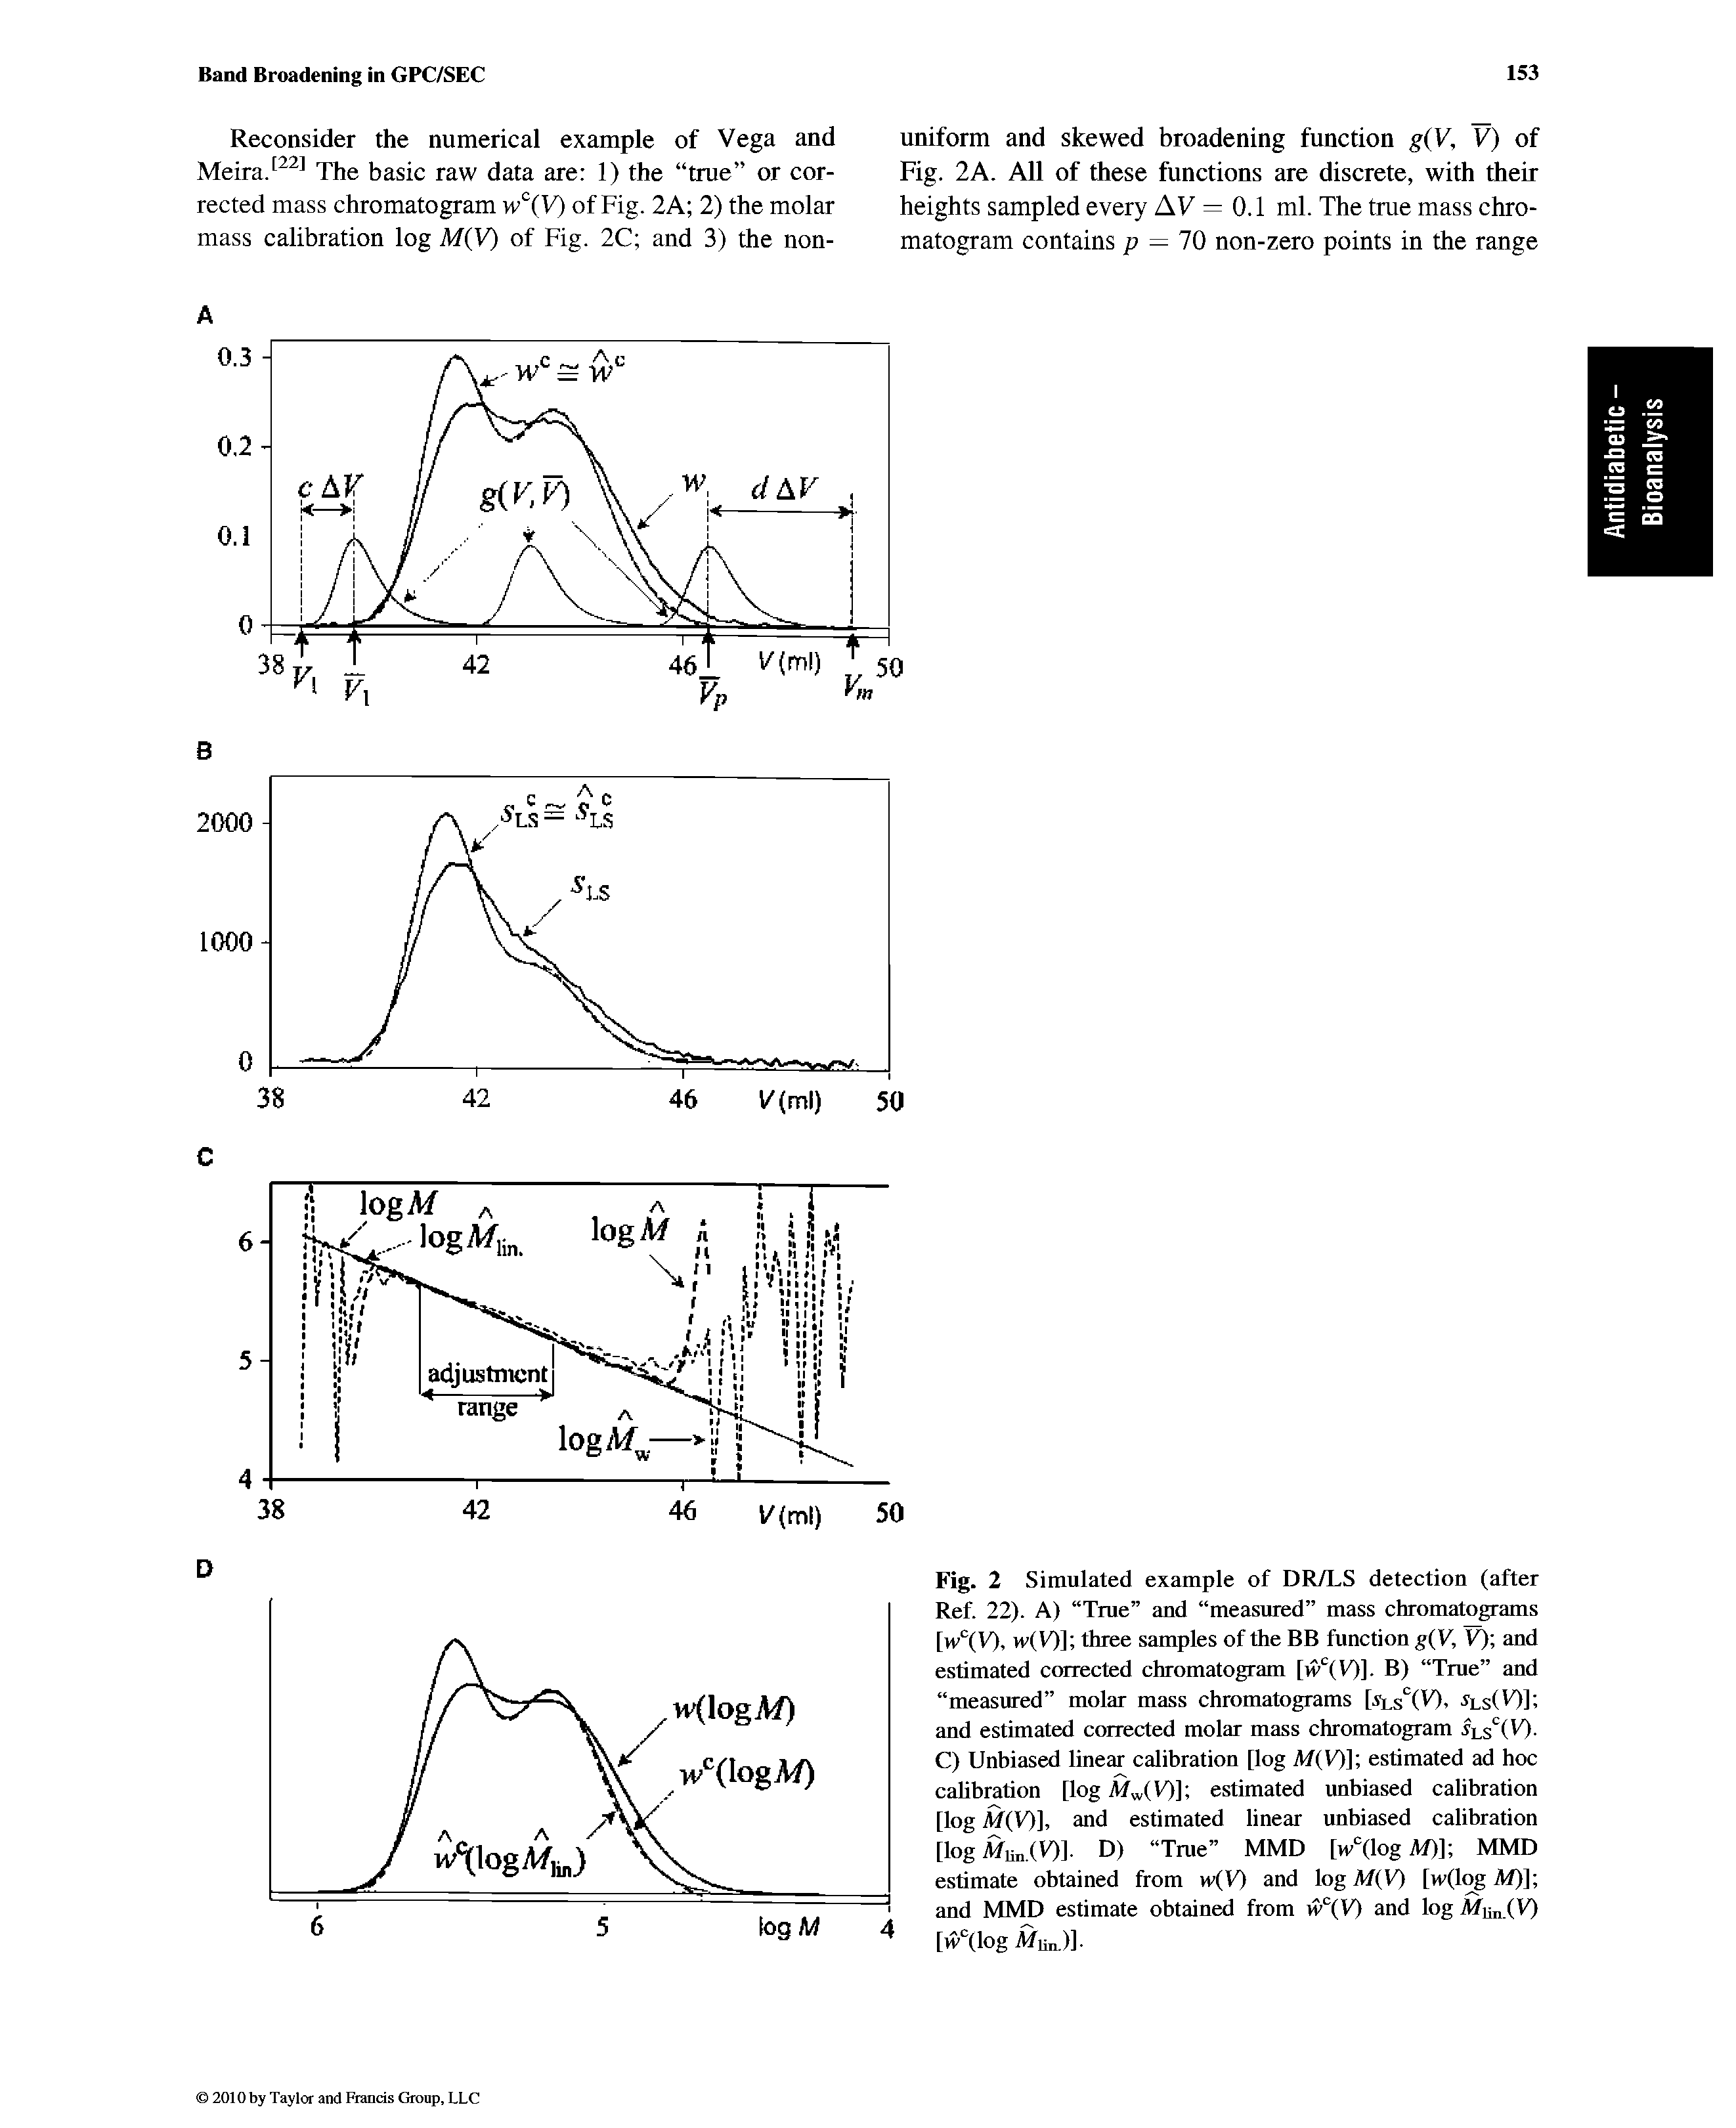 Fig. 2 Simulated example of DR/LS detection (after Ref. 22). A) Tme and measured mass chromatograms [w (V), w(V)] three samples of the BB function g(V, V) and estimated corrected chromatogram [ (V)]. B) True and measured molar mass chromatograms [. s (V), rLs(V)] and estimated corrected molar mass chromatogram fLs (F)-C) Unbiased linear calibration [log A/(V)1 estimated ad hoc calibration [log M (V)] estimated unbiased calibration [log A/(V)], and estimated linear unbiased calibration [log AfiinXV)]. D) True MMD [w (log A/)] MMD estimate obtained from >v(V) and log M V) [w(log Af)] and MMD estimate obtained from and log Afun.(V)...